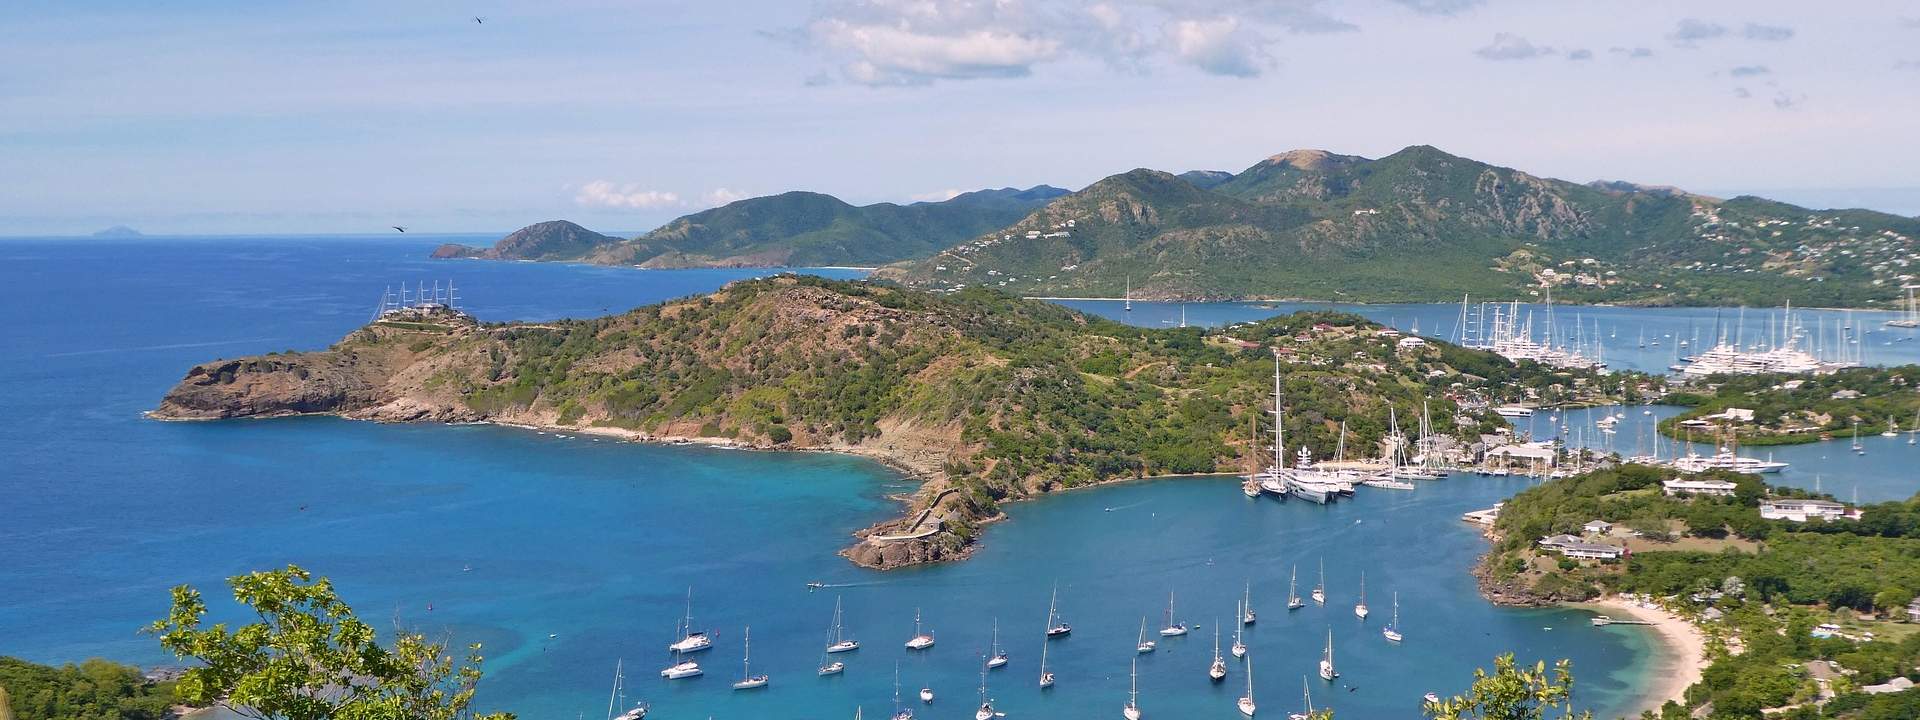 The most beautiful of the caribbean islands on board an exceptional vessel